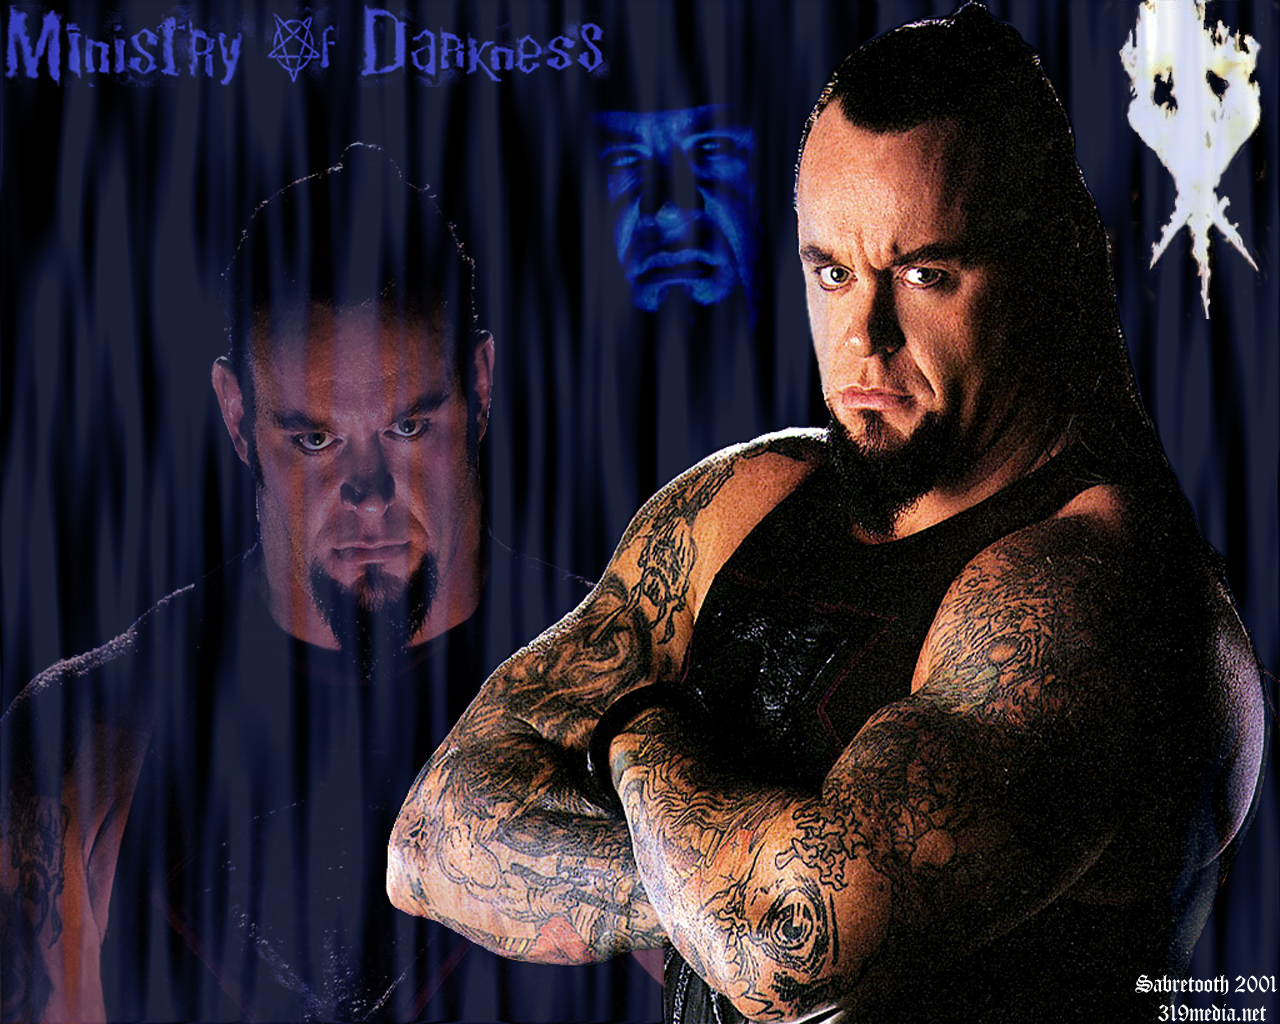 Ministry of Darkness Undertaker by 319media